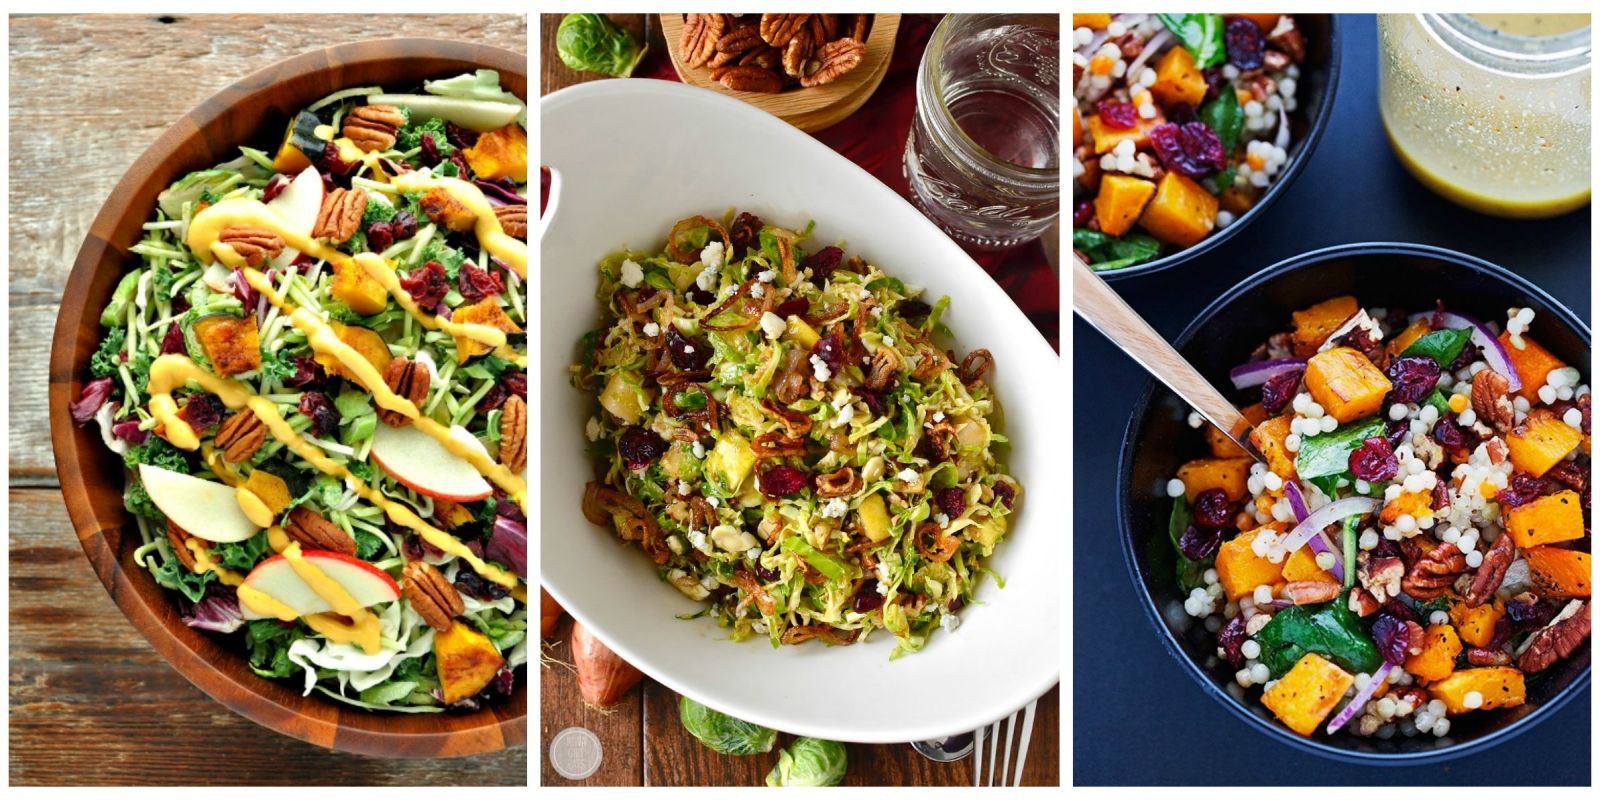 Healthy Fall Salads
 14 Best Fall Salad Recipes Healthy Ideas for Autumn Salads